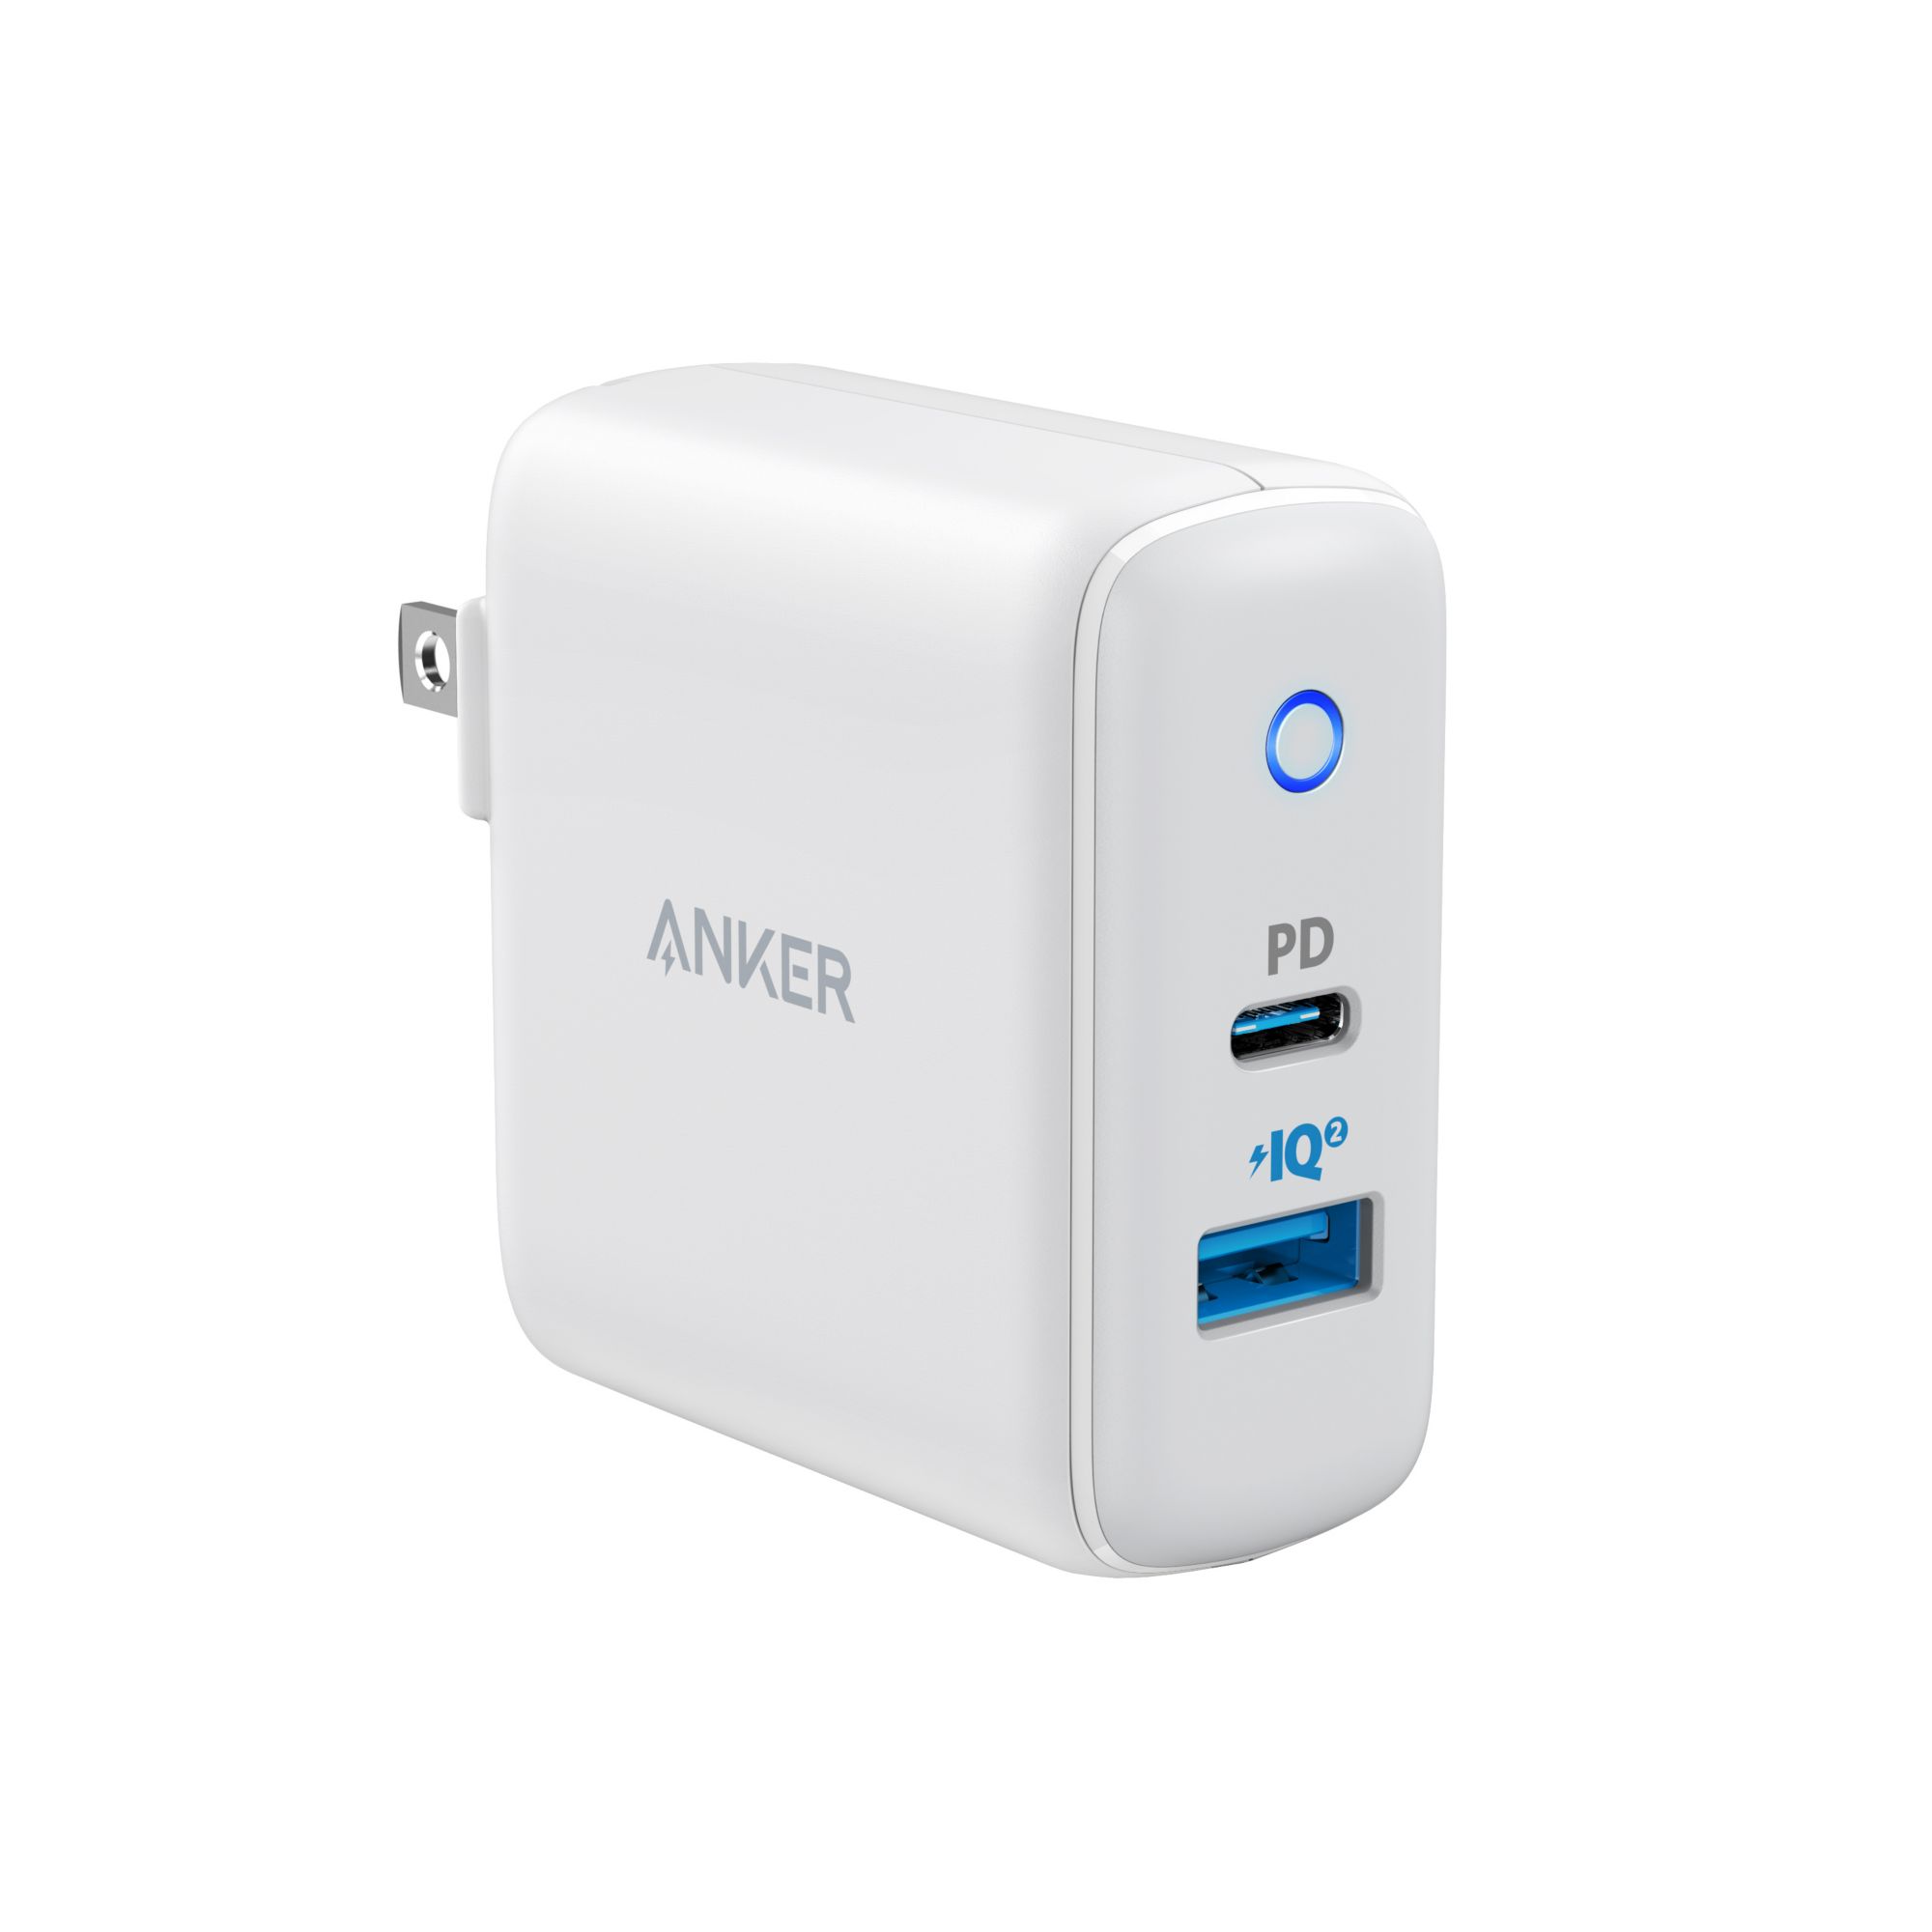 Anker PowerPort PD+ 2 with Lightning Cable